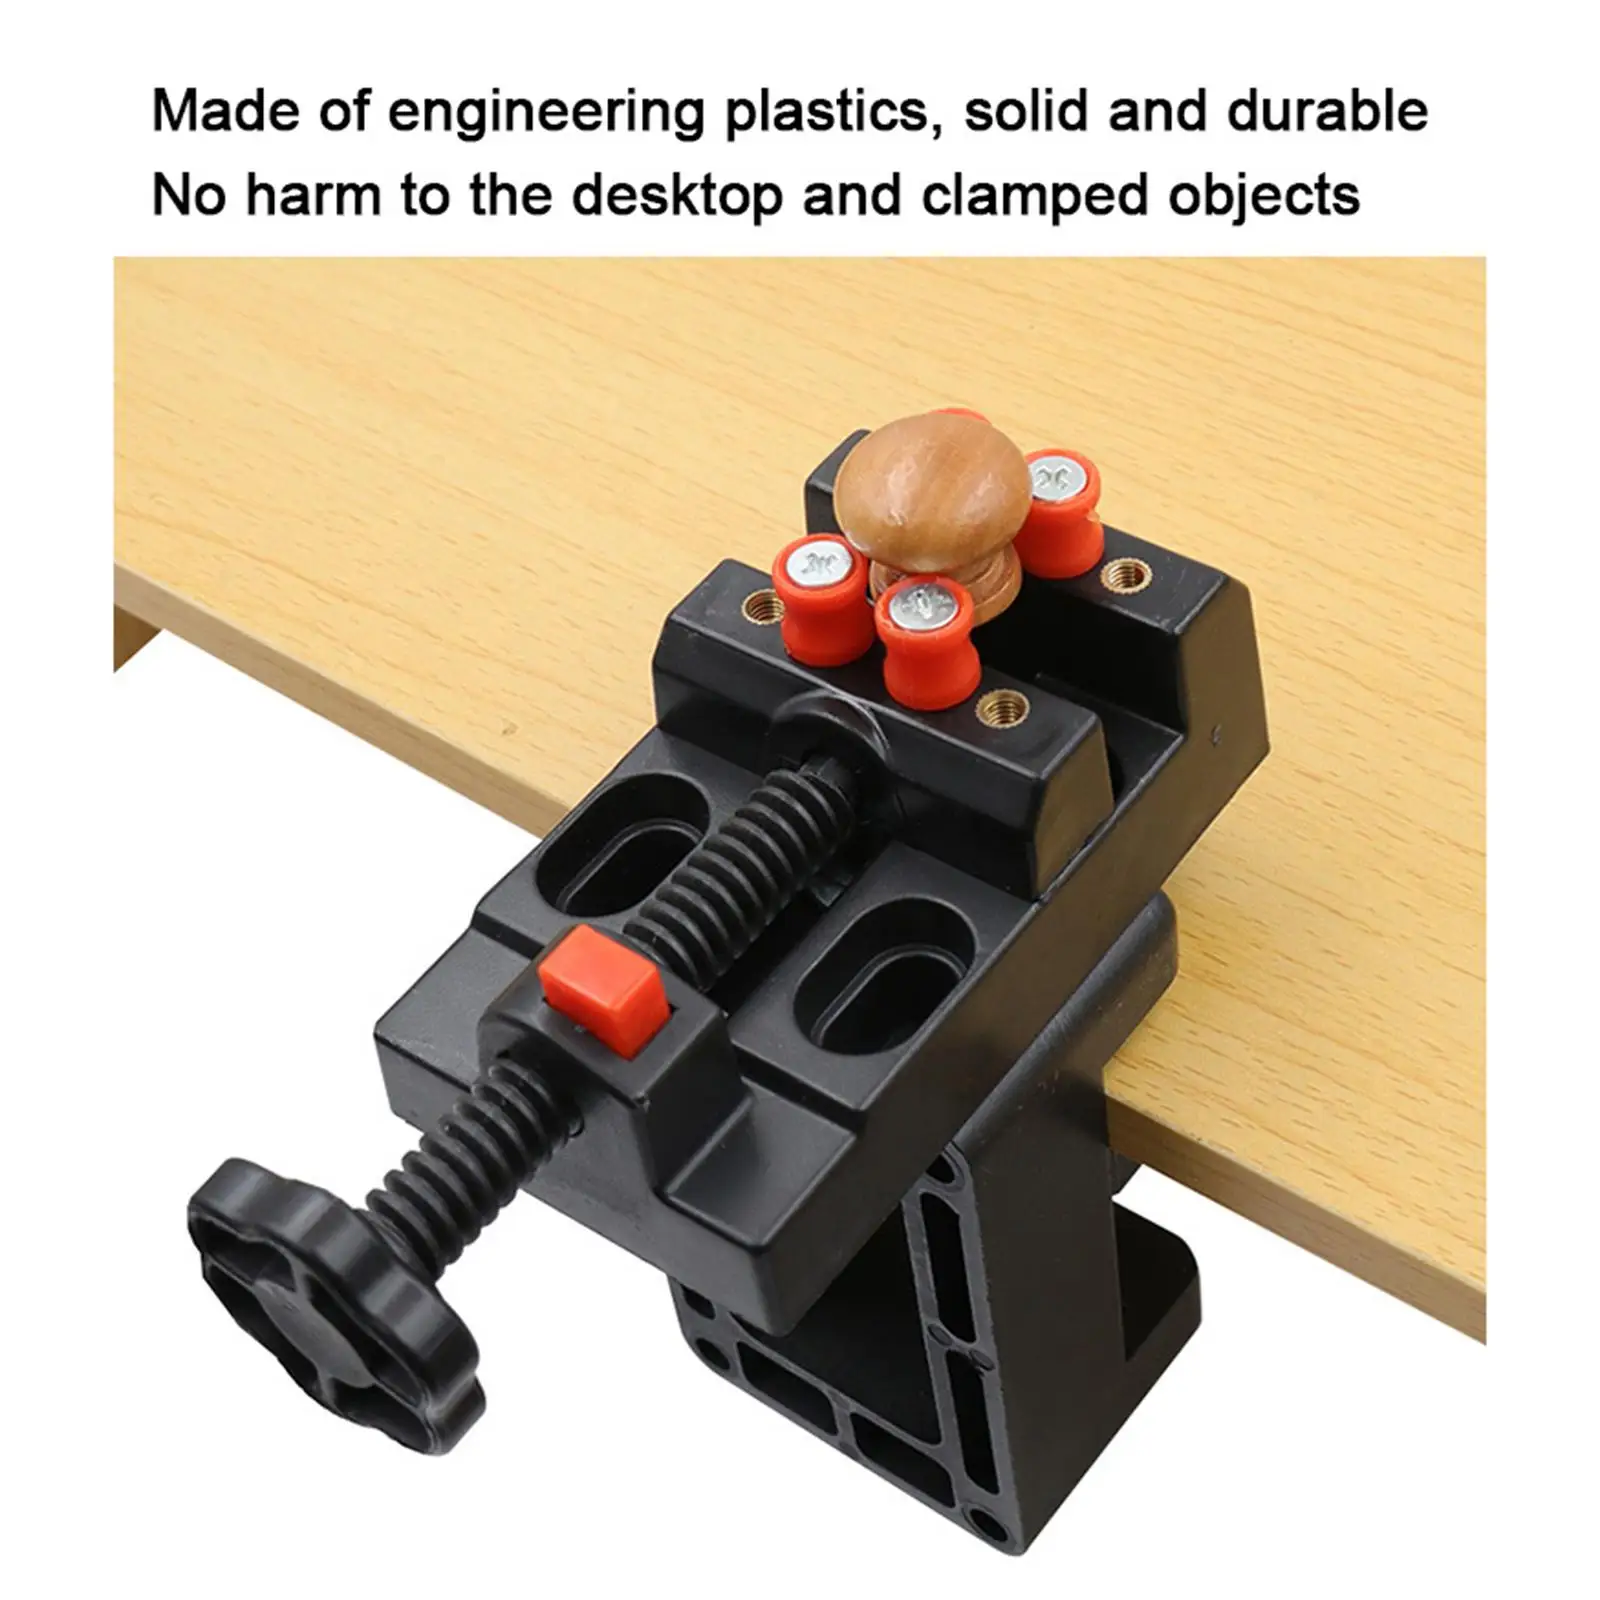 Portable Tabletop Clamp Vice Woodworking Clamps for Model Jewelry Making